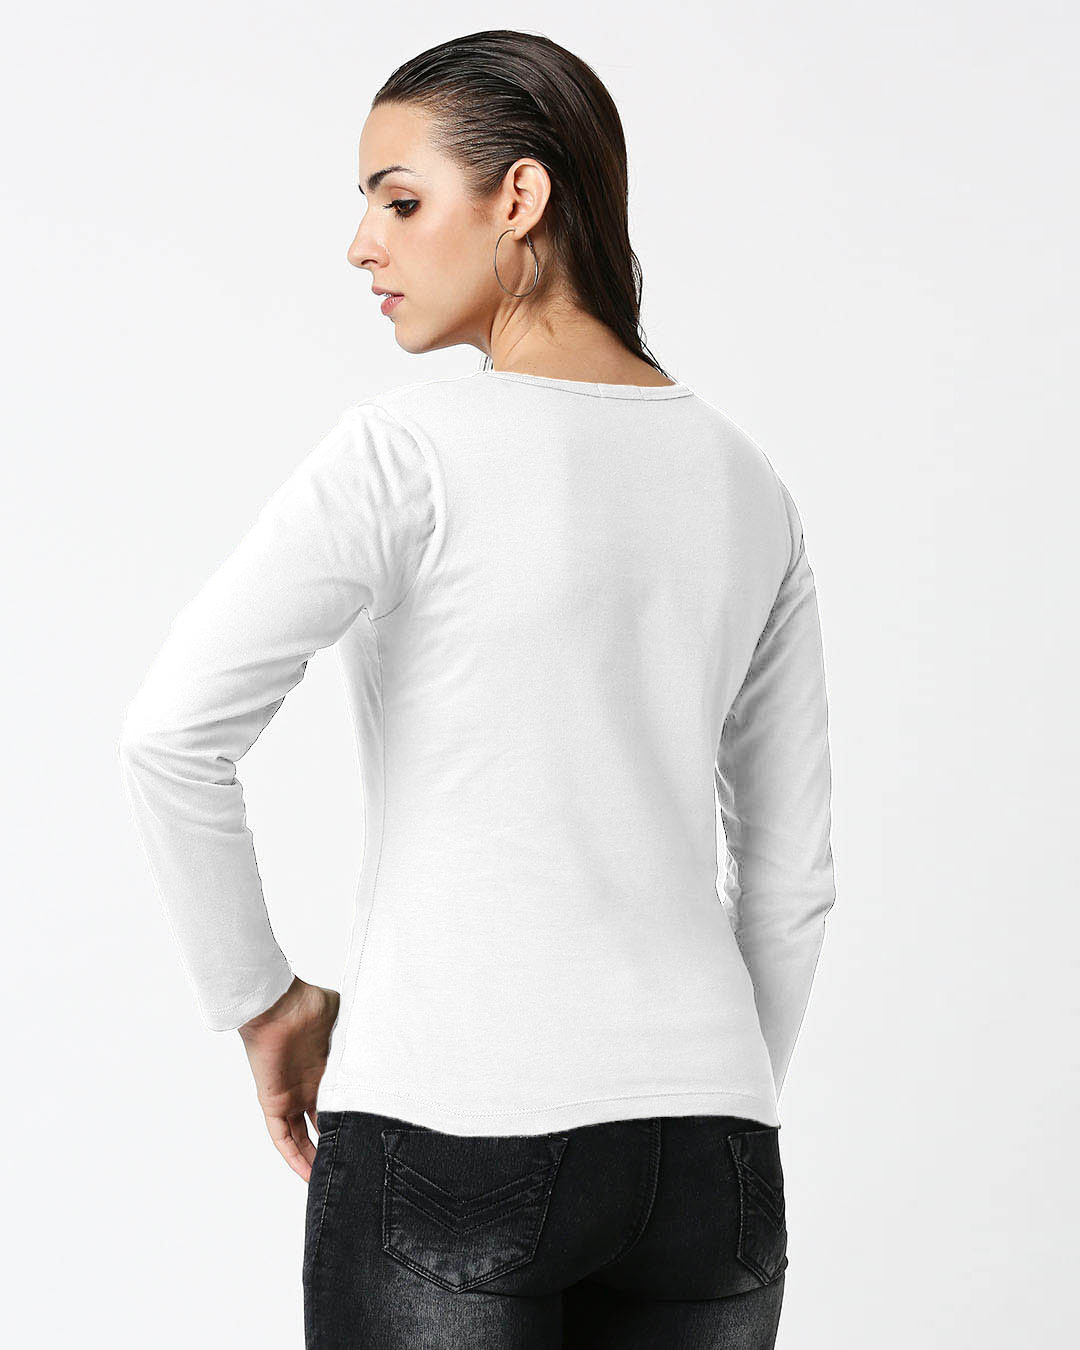 Shop Apparently Dramatic Full Sleeves T-Shirt White-Back